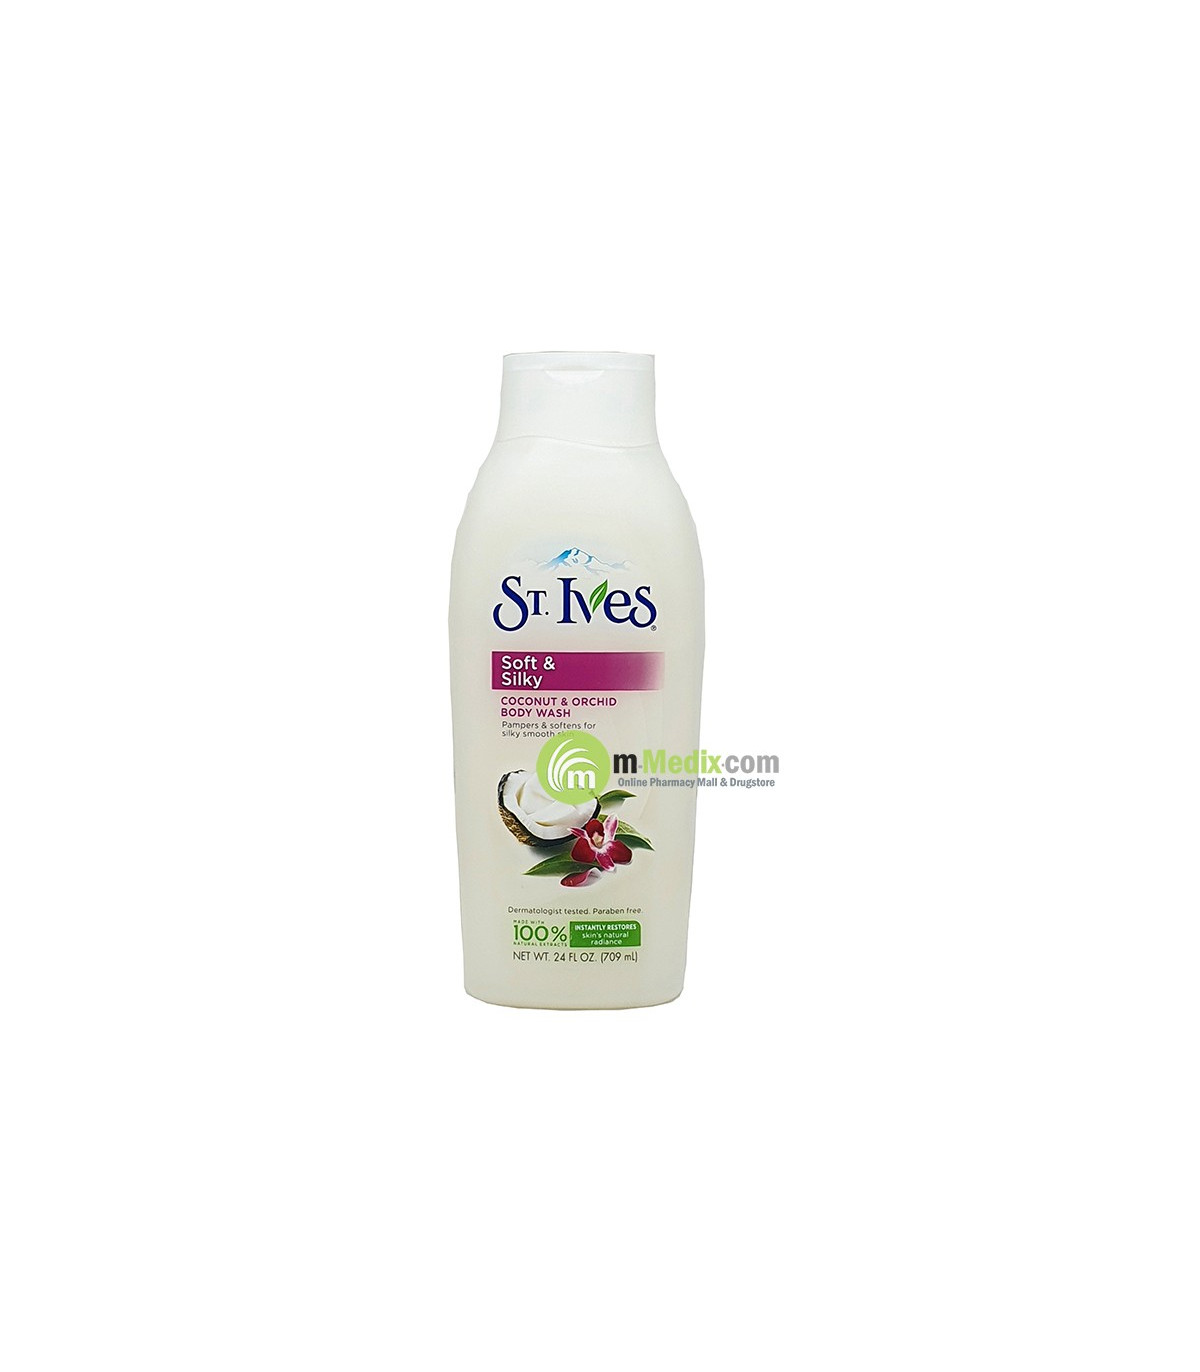 St. Ives SOFT & SILKY Coconut-Orchid Body Wash – 709ml